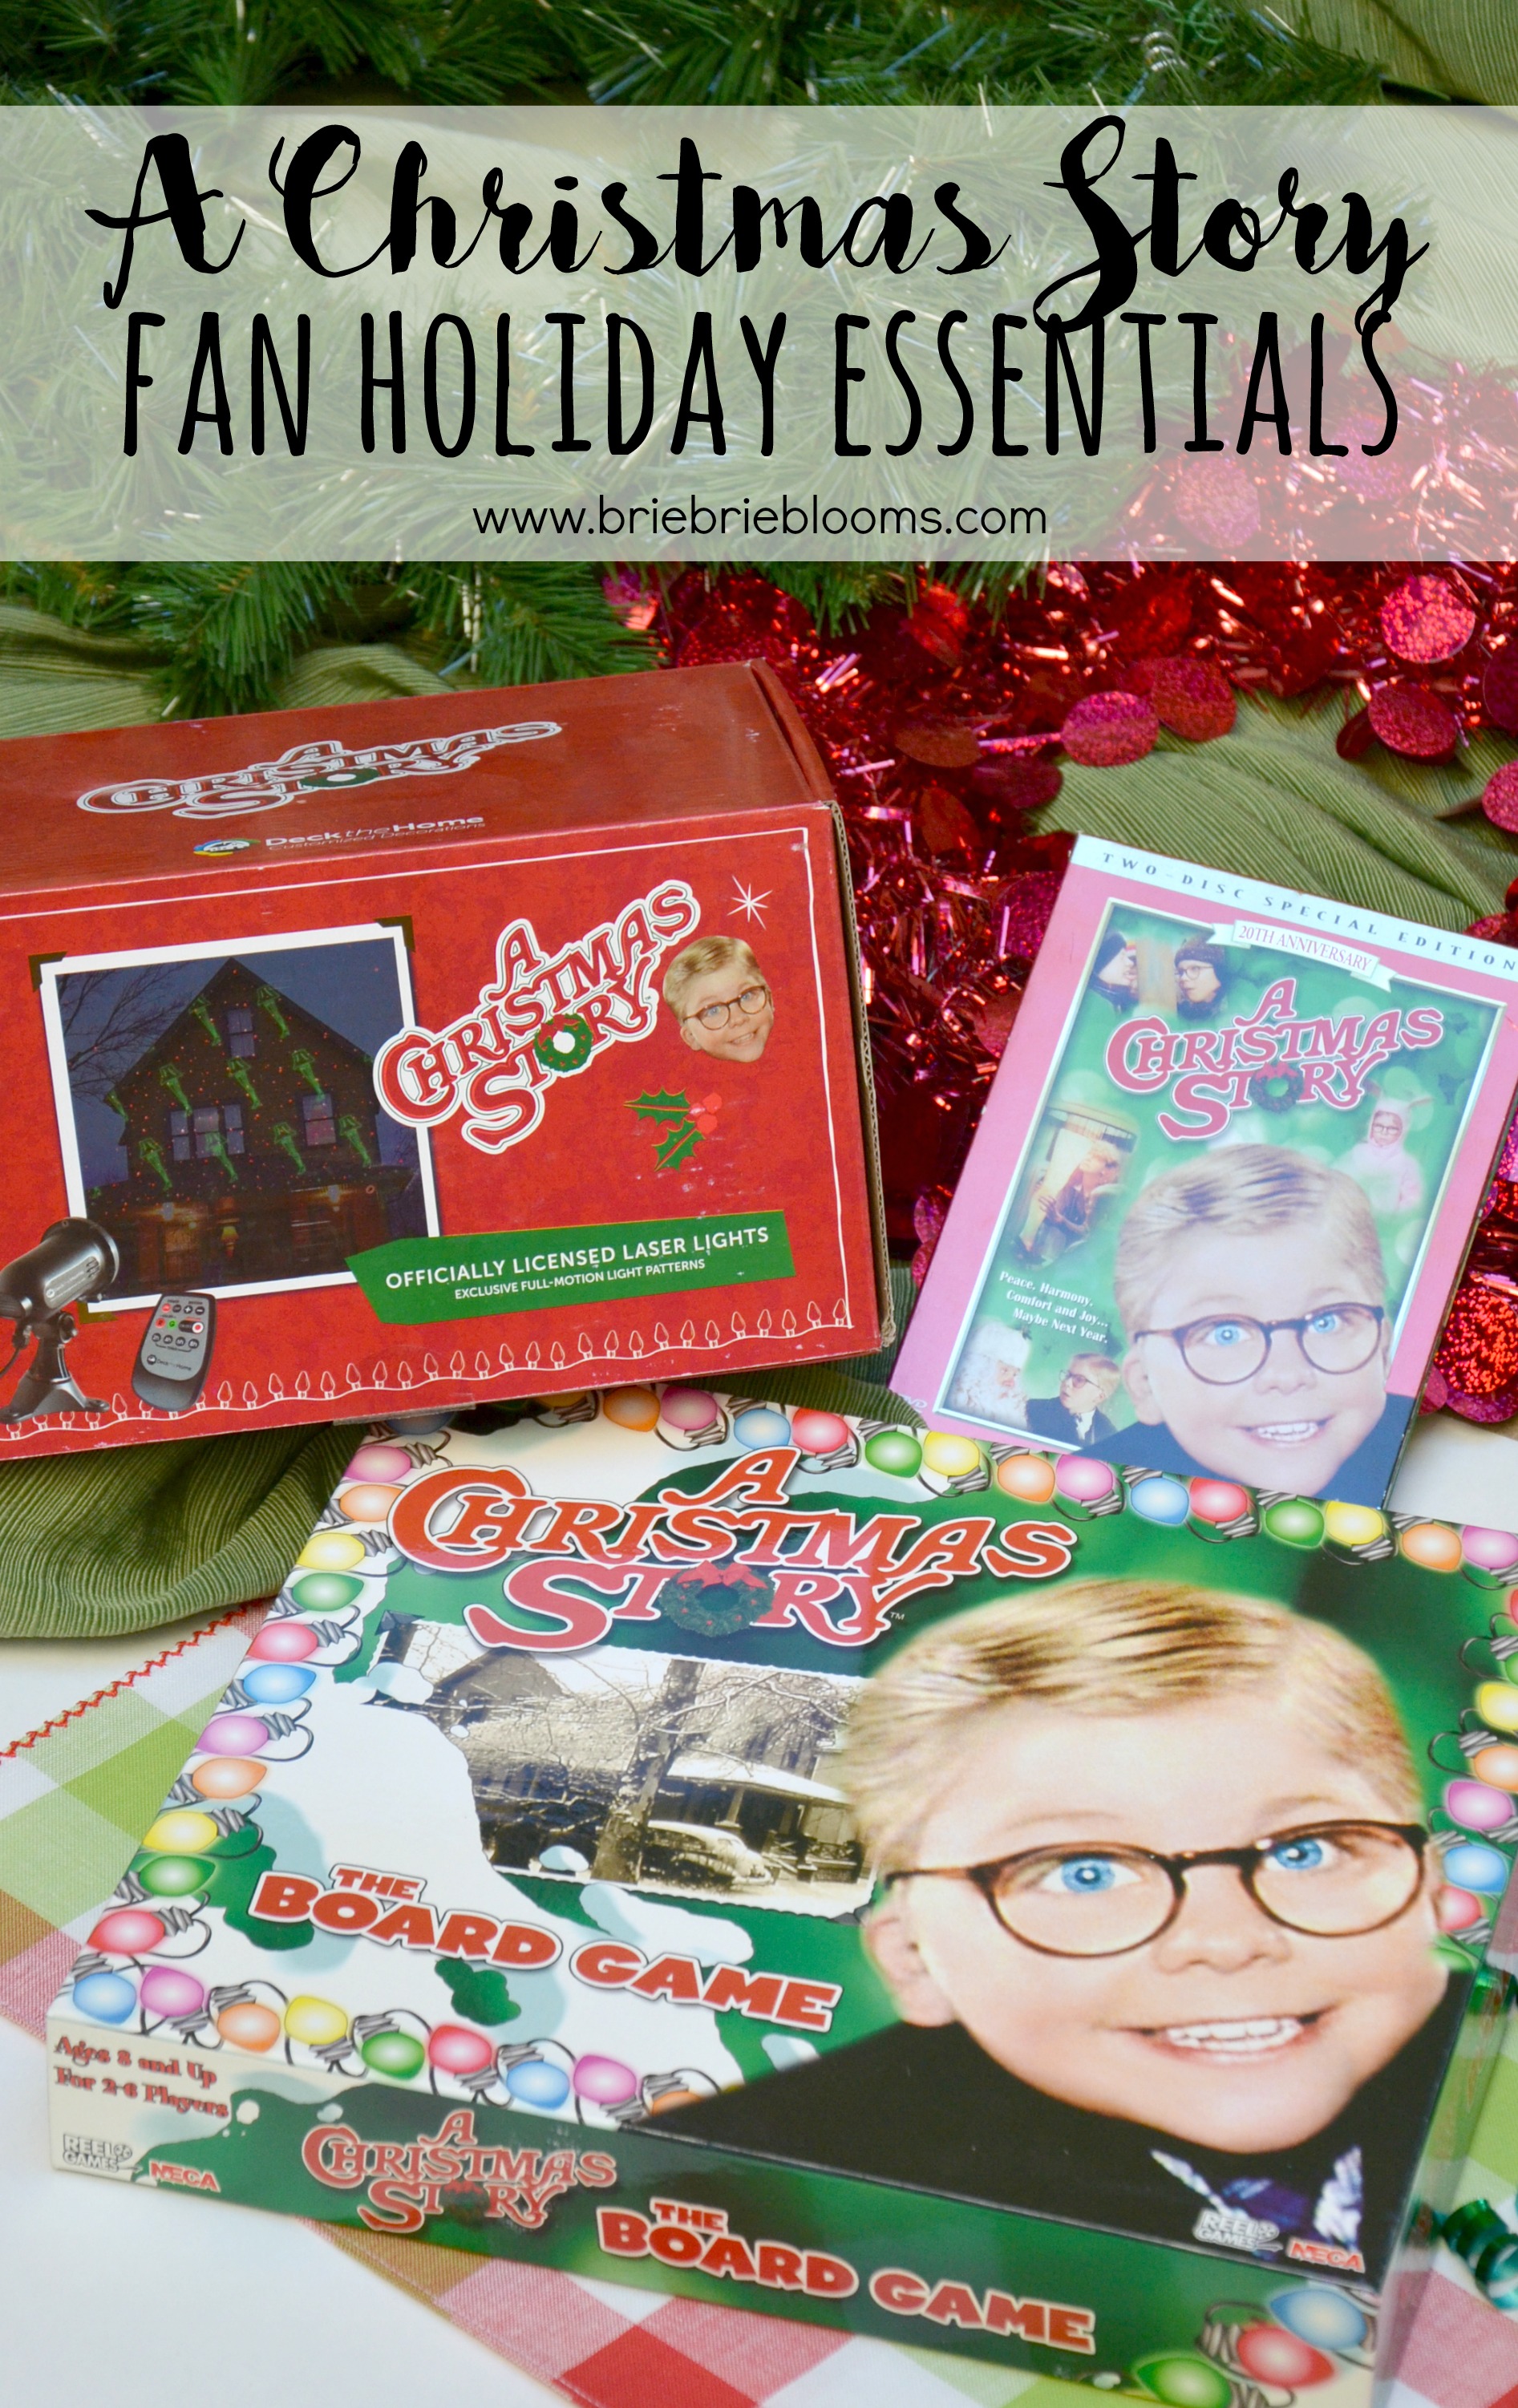 A Christmas Story Fan Holiday Essentials